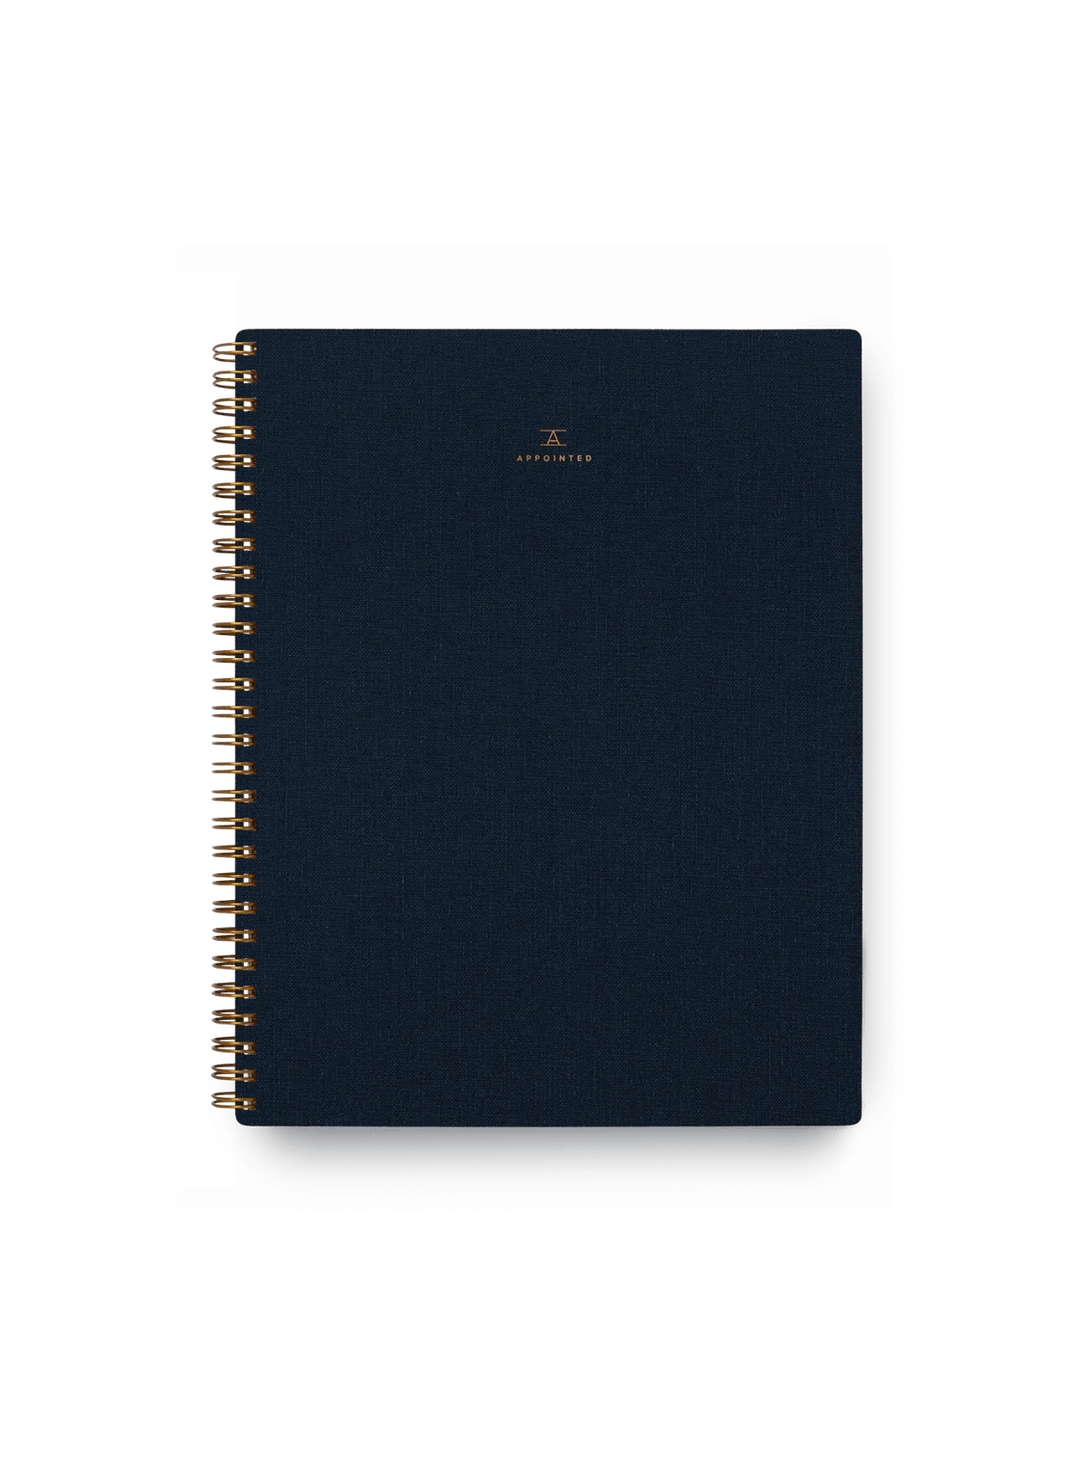 Appointed Notebook Oxford Blue Appointed The Notebook - Lined